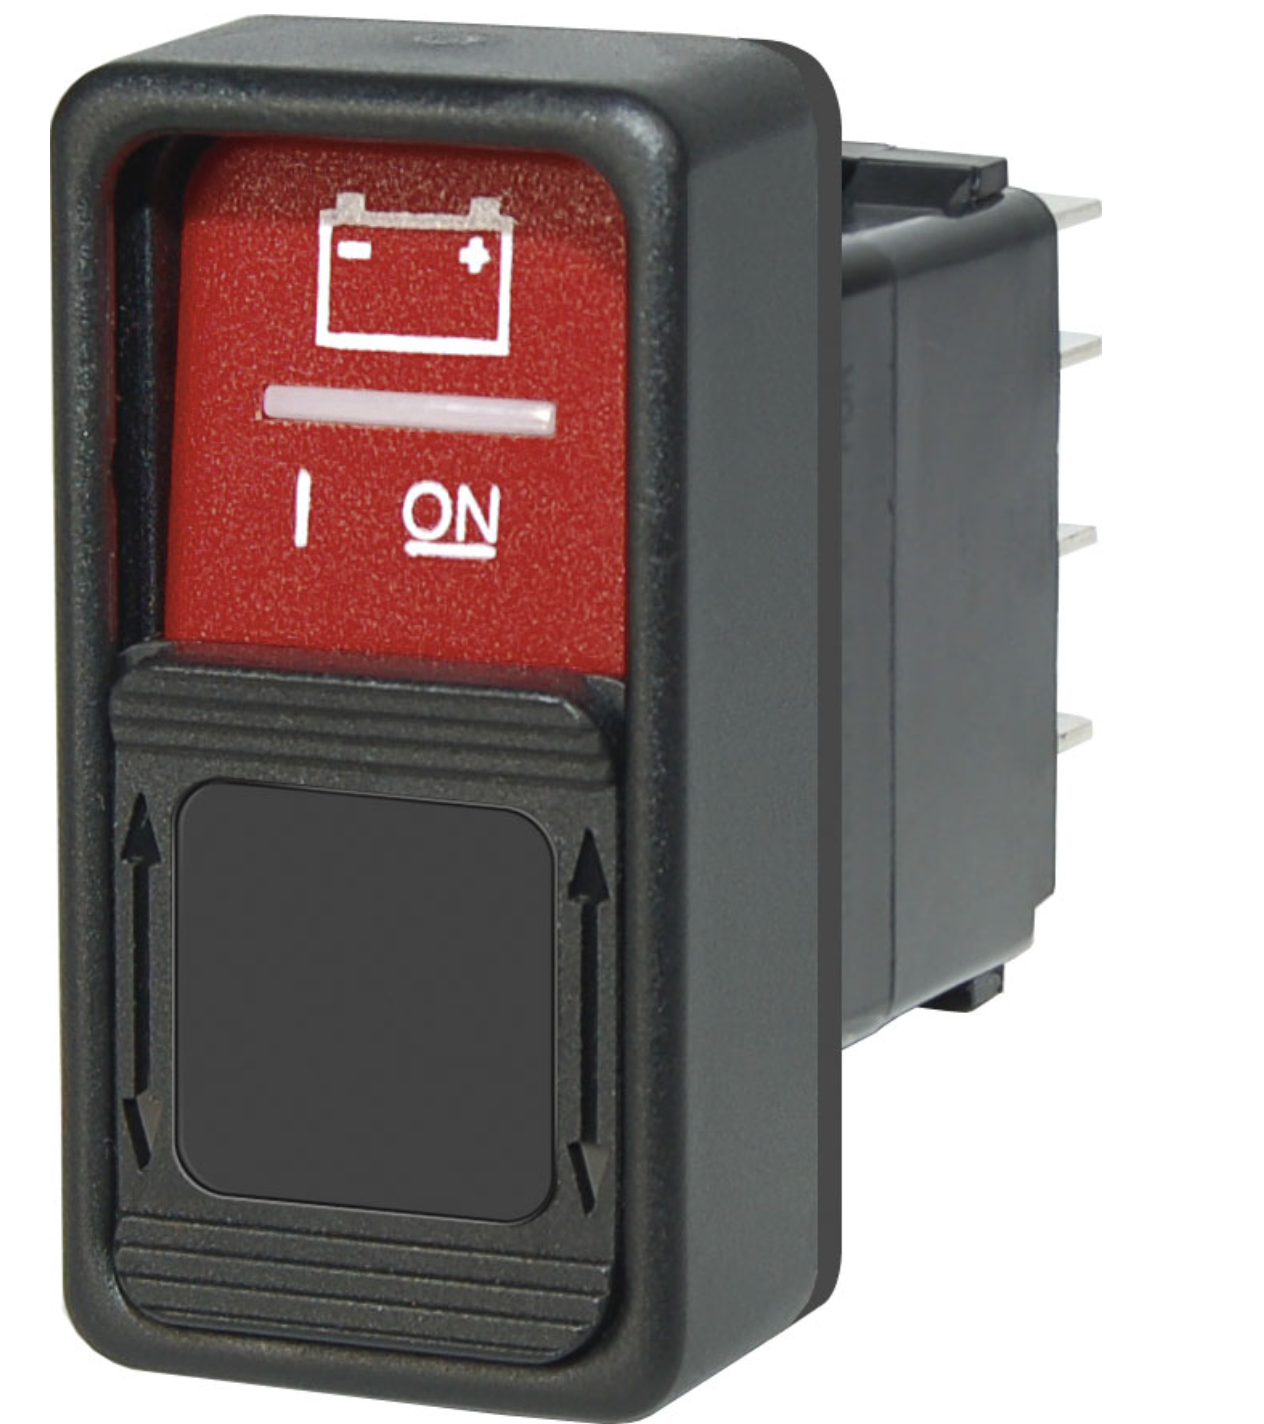 SPDT Remote Control Contura Switch - ON-ON